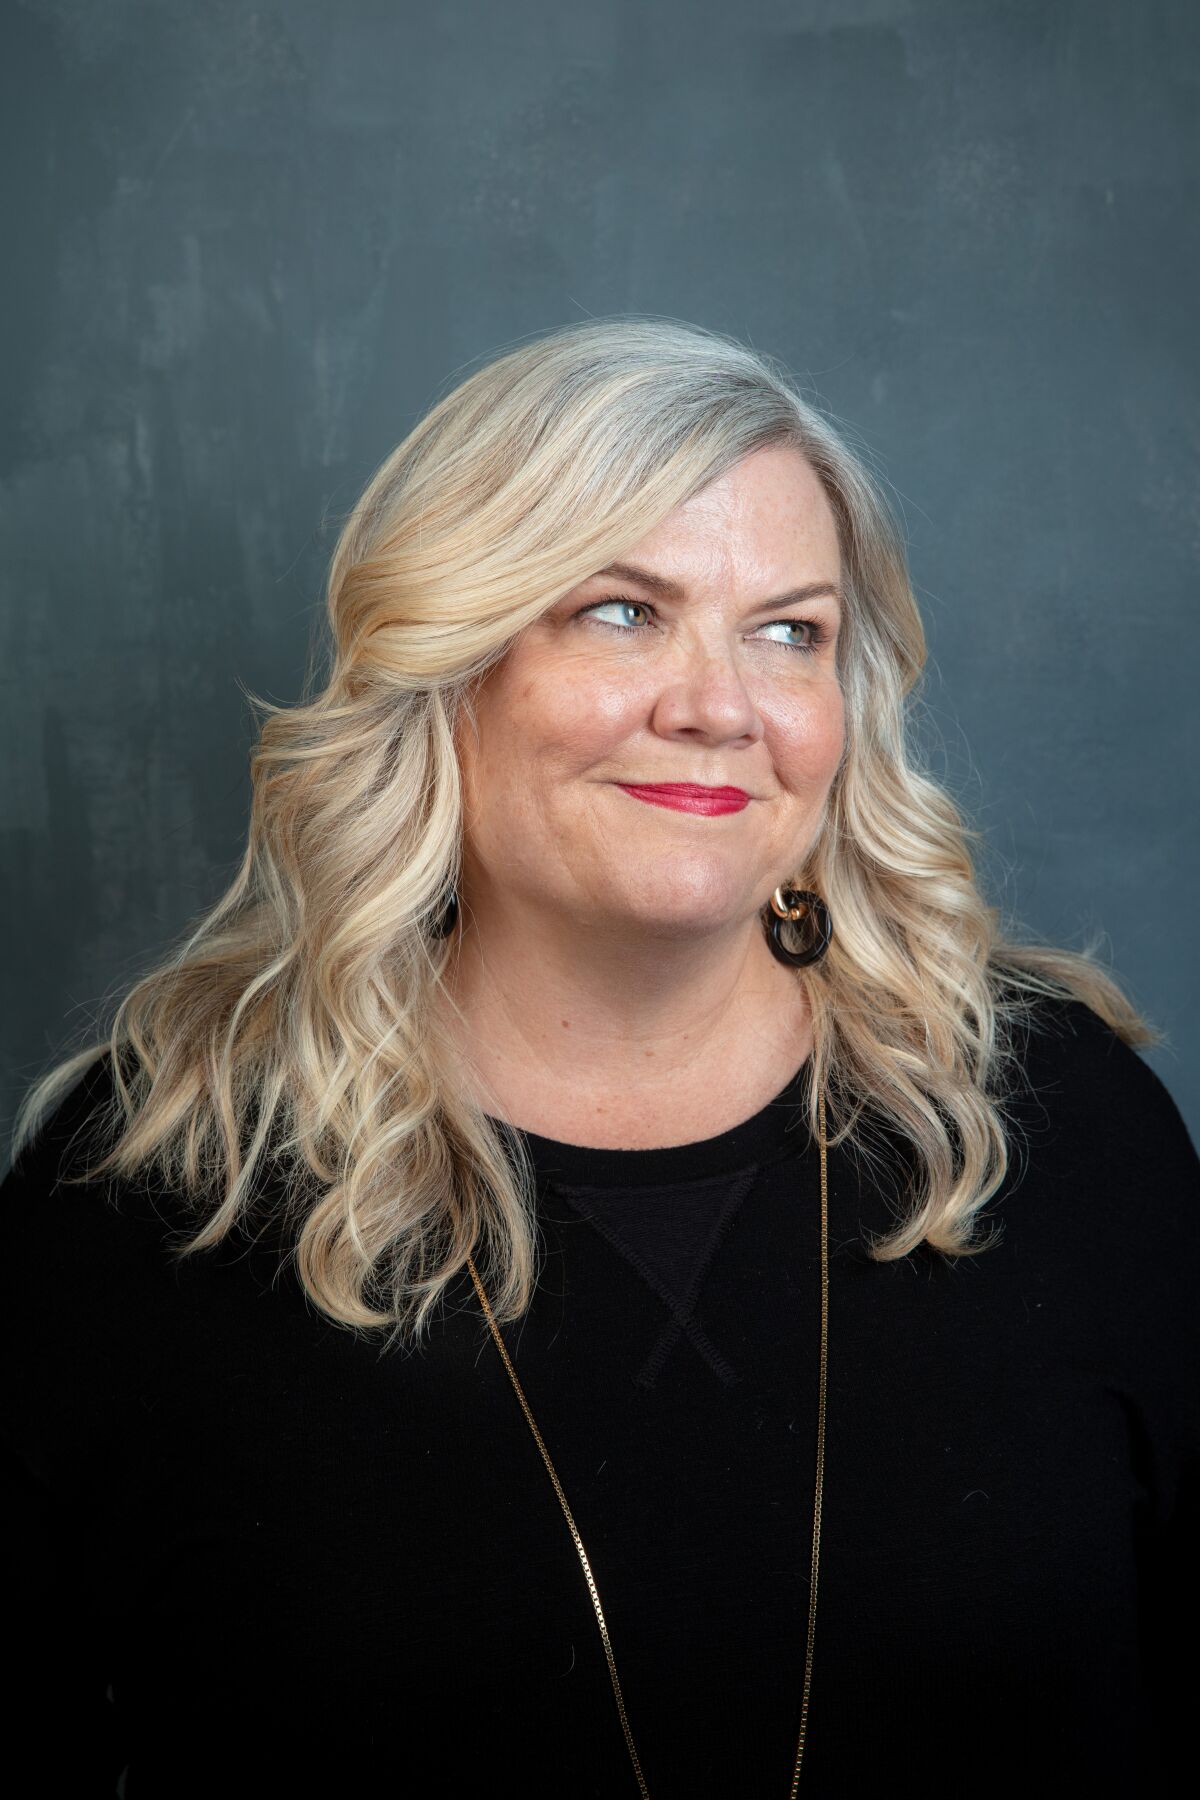 Former "SNL" head writer Paula Pell in 2019. She's now starring as a Jessica Fletcher type in Quibi's "Mapleworth Murders."